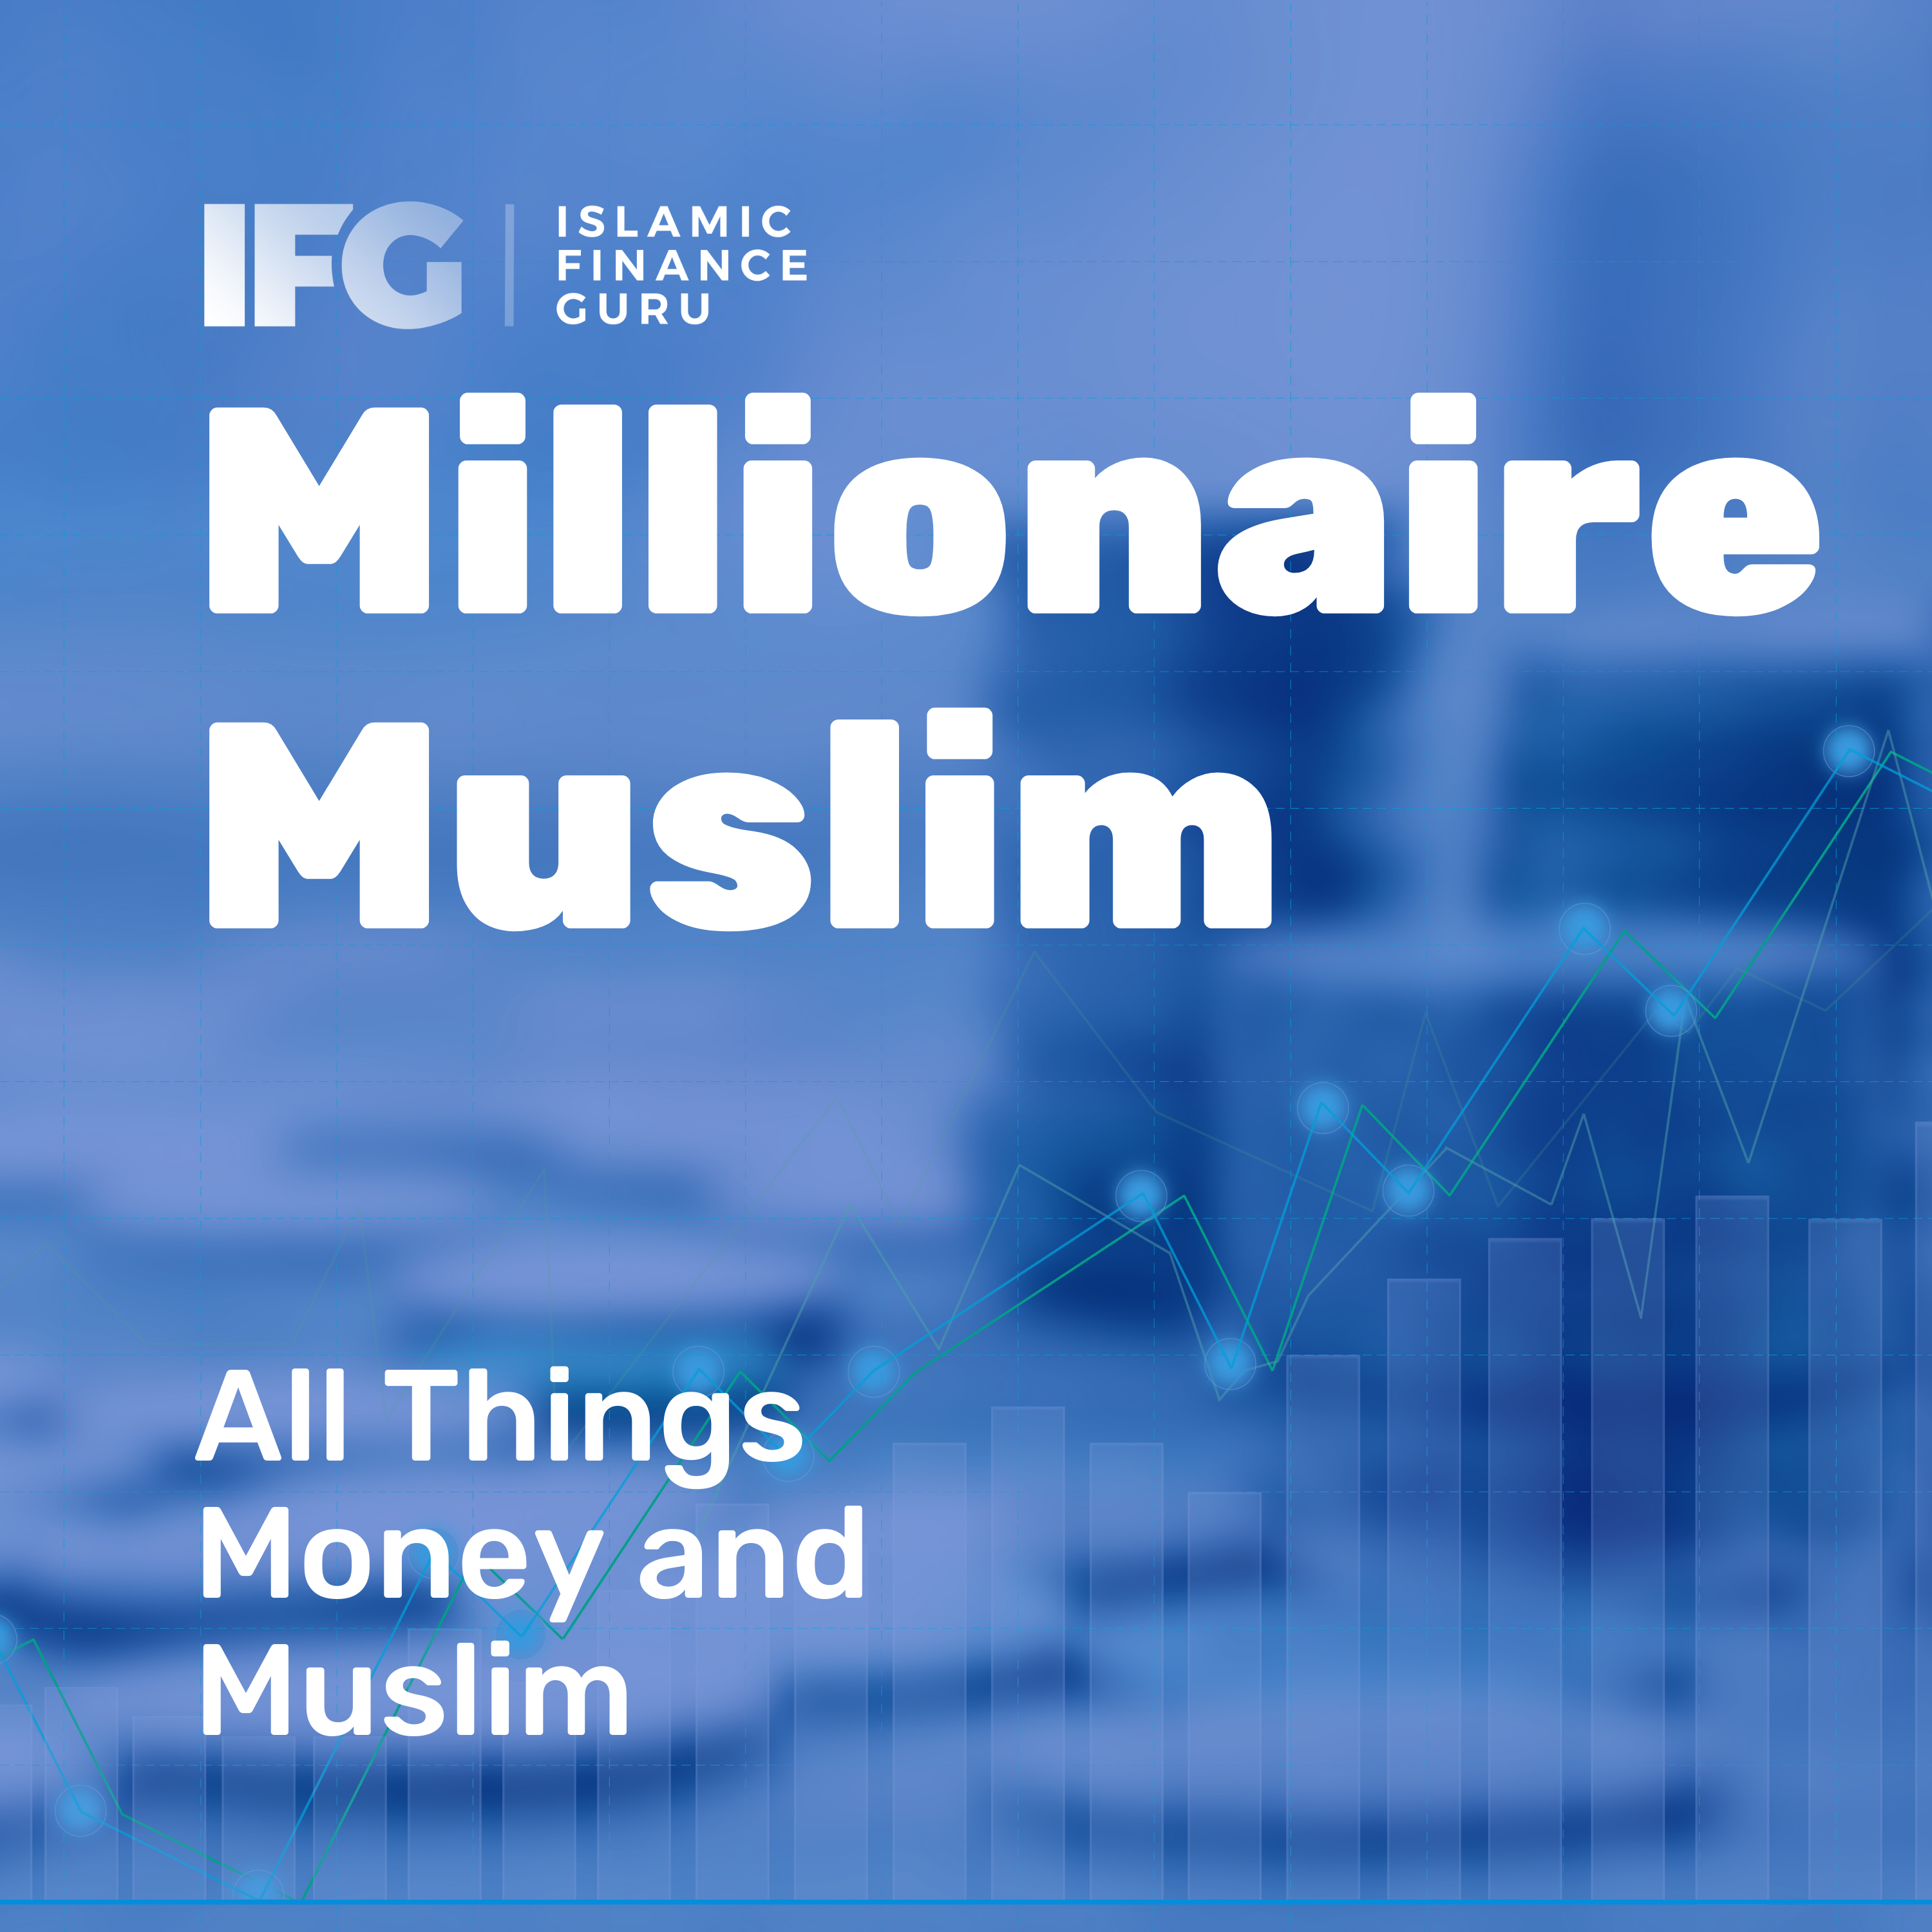 E66 Podcast: How Companies Make Money in Unexpected Ways | IFG Featured Image